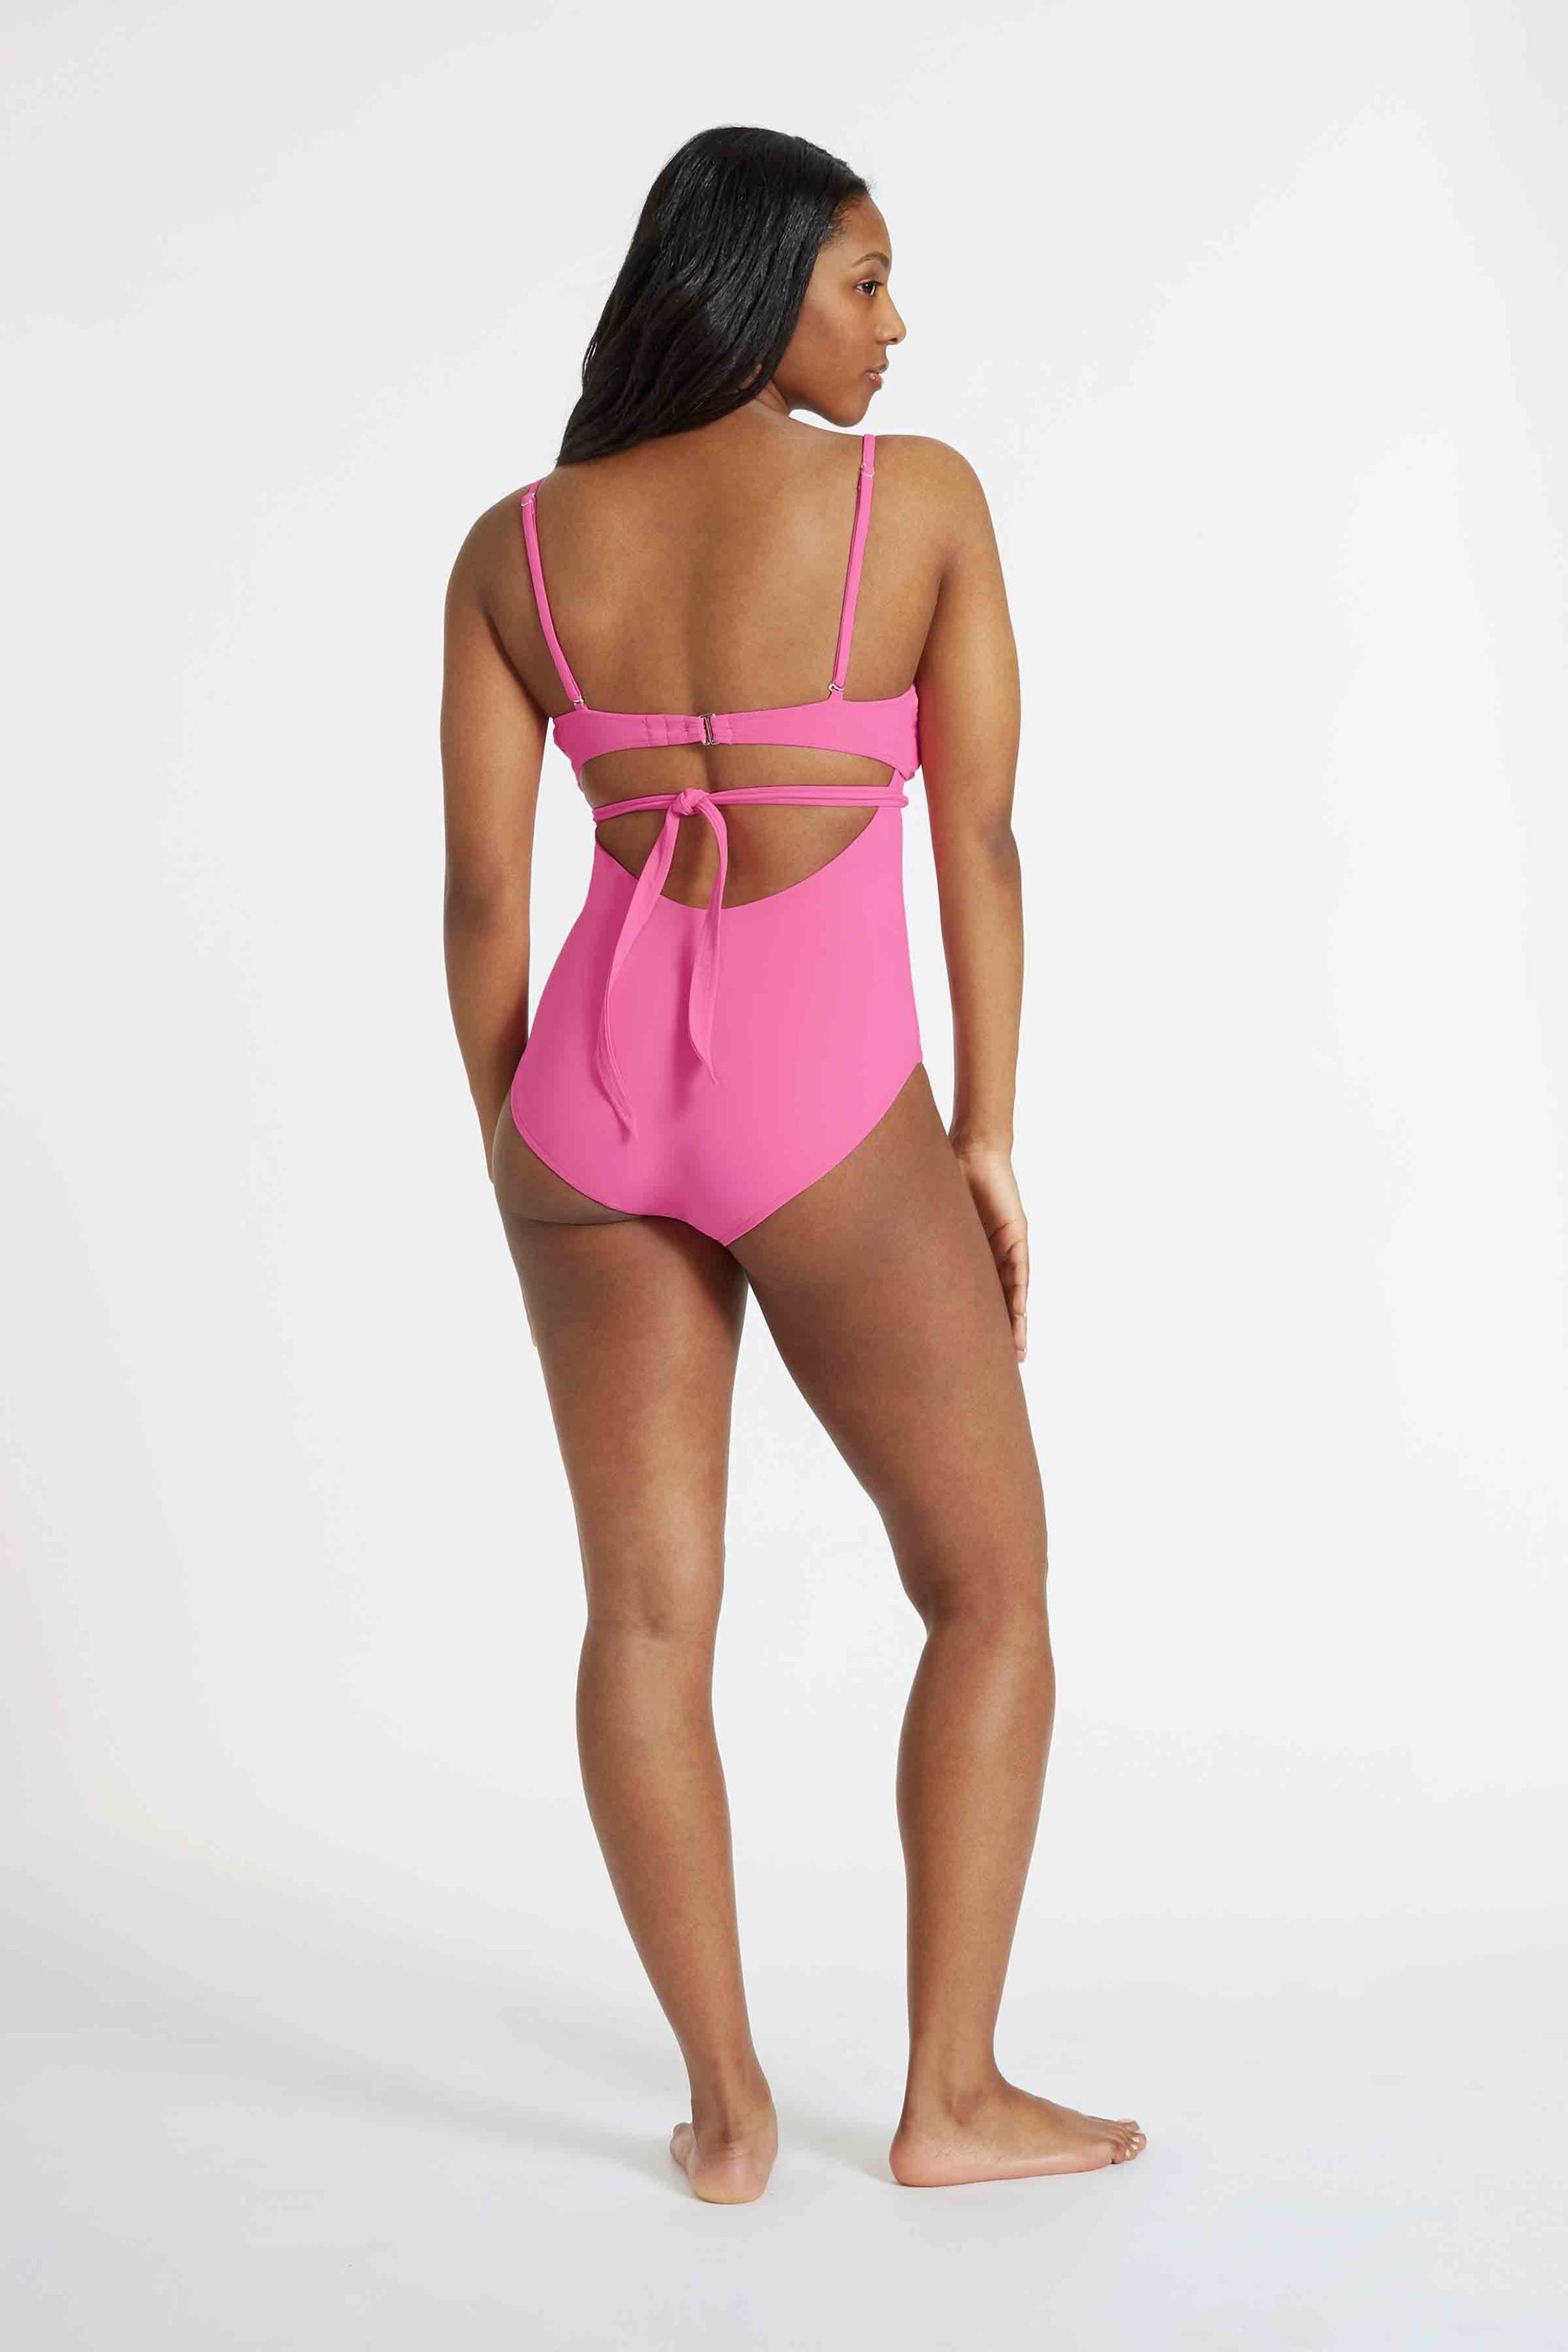 Free As The Sea Teal Cross Halter Neck One Piece Swimsuit FINAL SALE – Pink  Lily